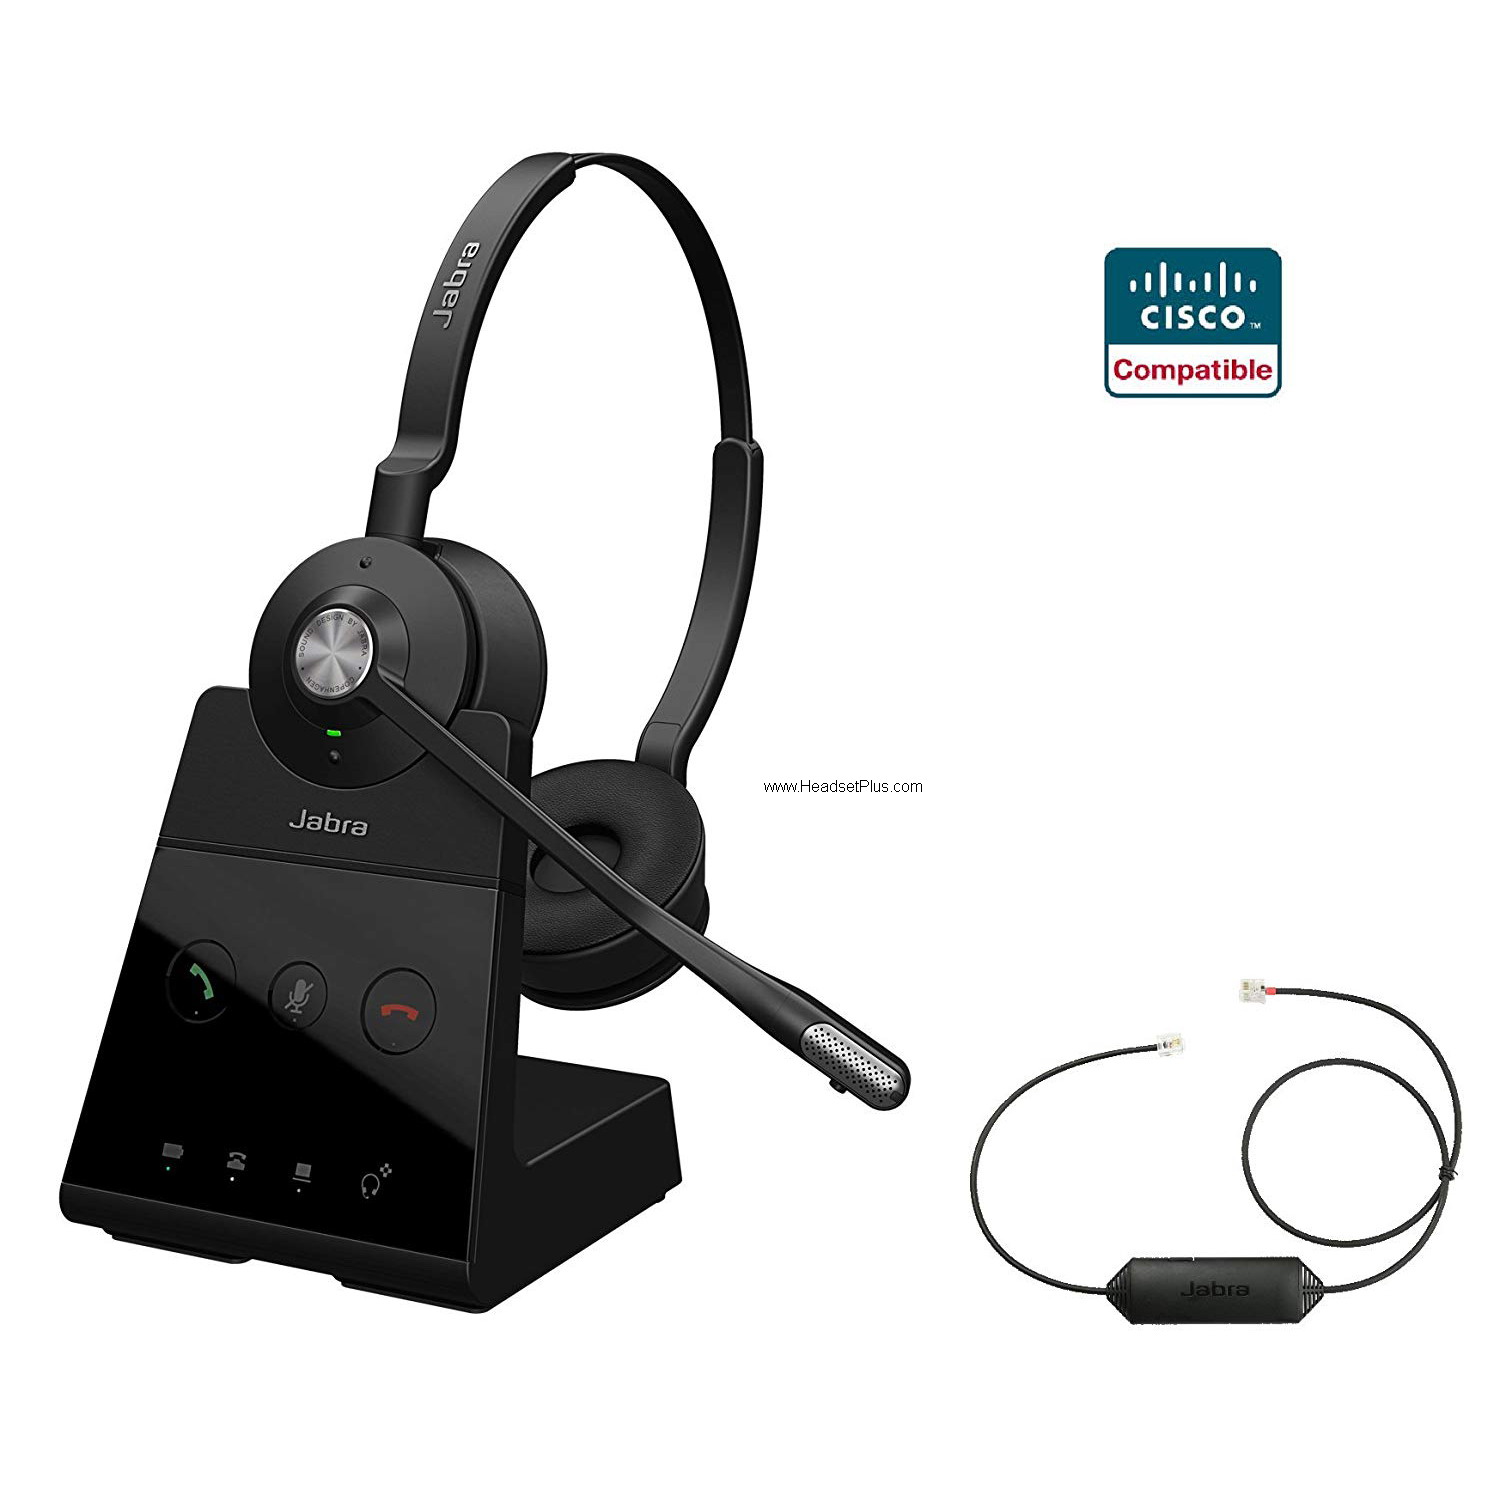 jabra engage 65 stereo+ehs cisco wireless headset system bundle icon view